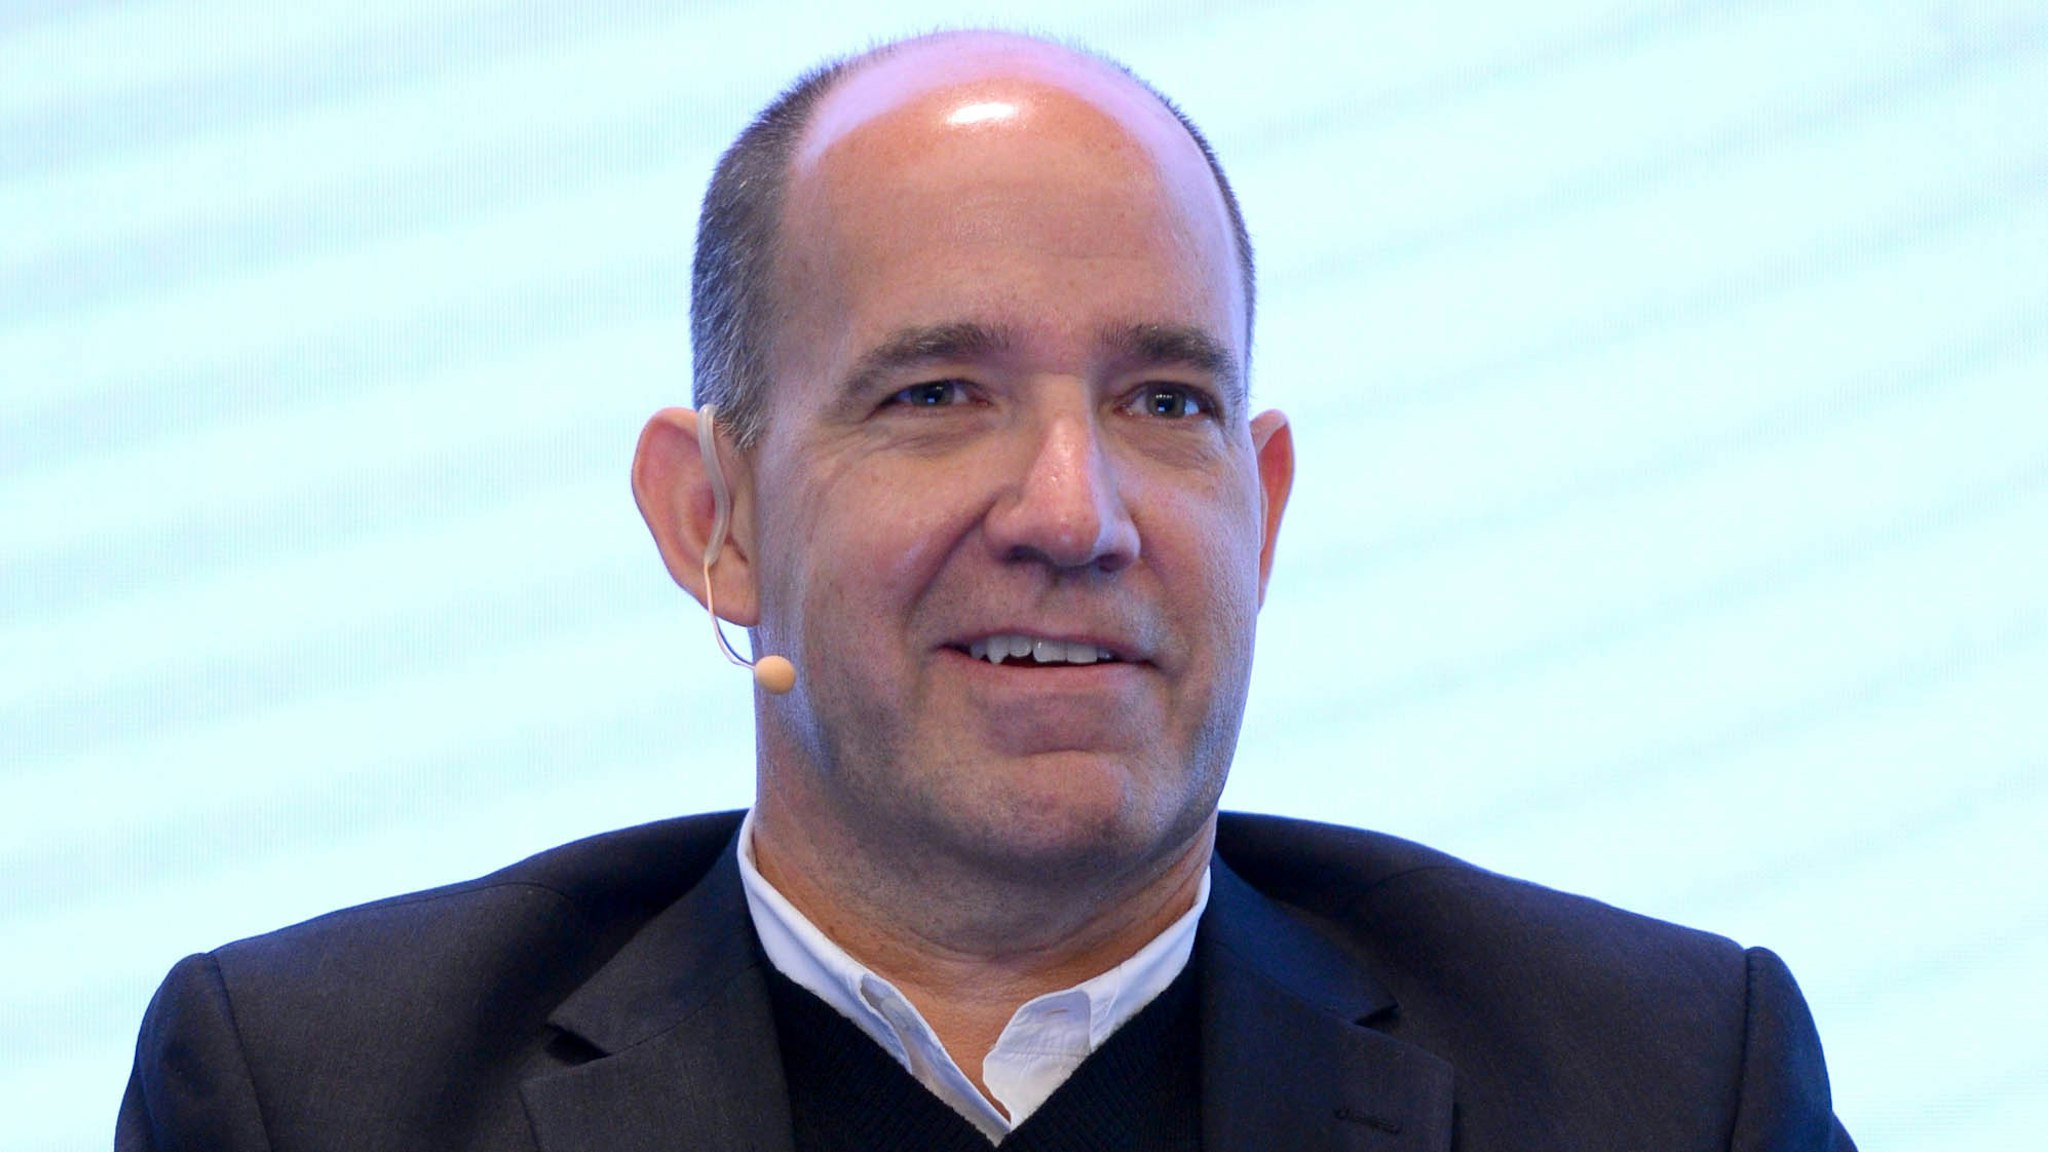 NEW YORK, NY - SEPTEMBER 30: ABC News Special Correspondent and Senior Strategic Advisor Matthew Dowd speaks onstage at the Conversation with The Washington Post panel presented by The Washington Post during Advertising Week 2015 AWXII at Nasdaq MarketSite on September 30, 2015 in New York City.